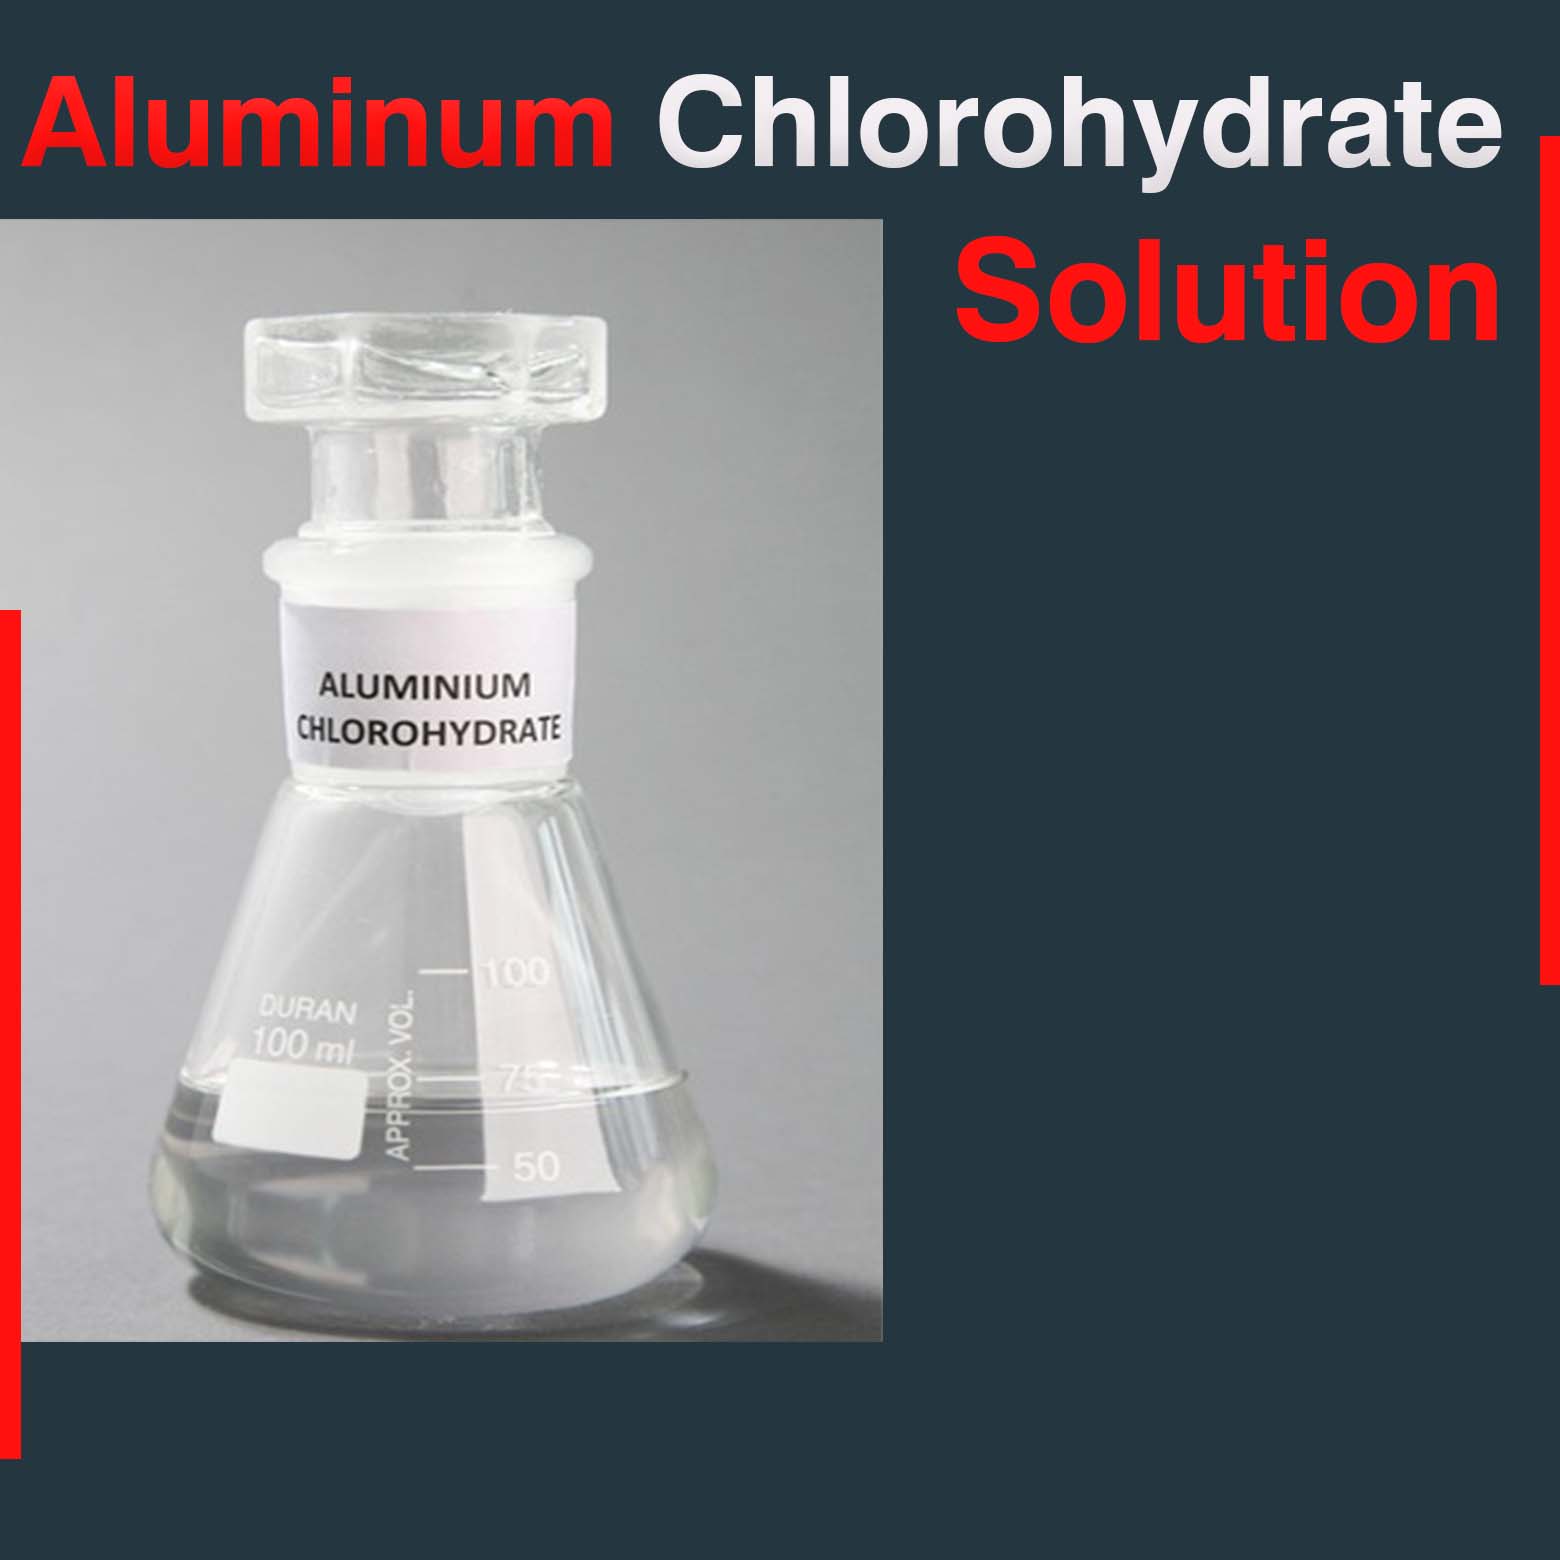 Aluminum Chlorohydrate Solution In Spain